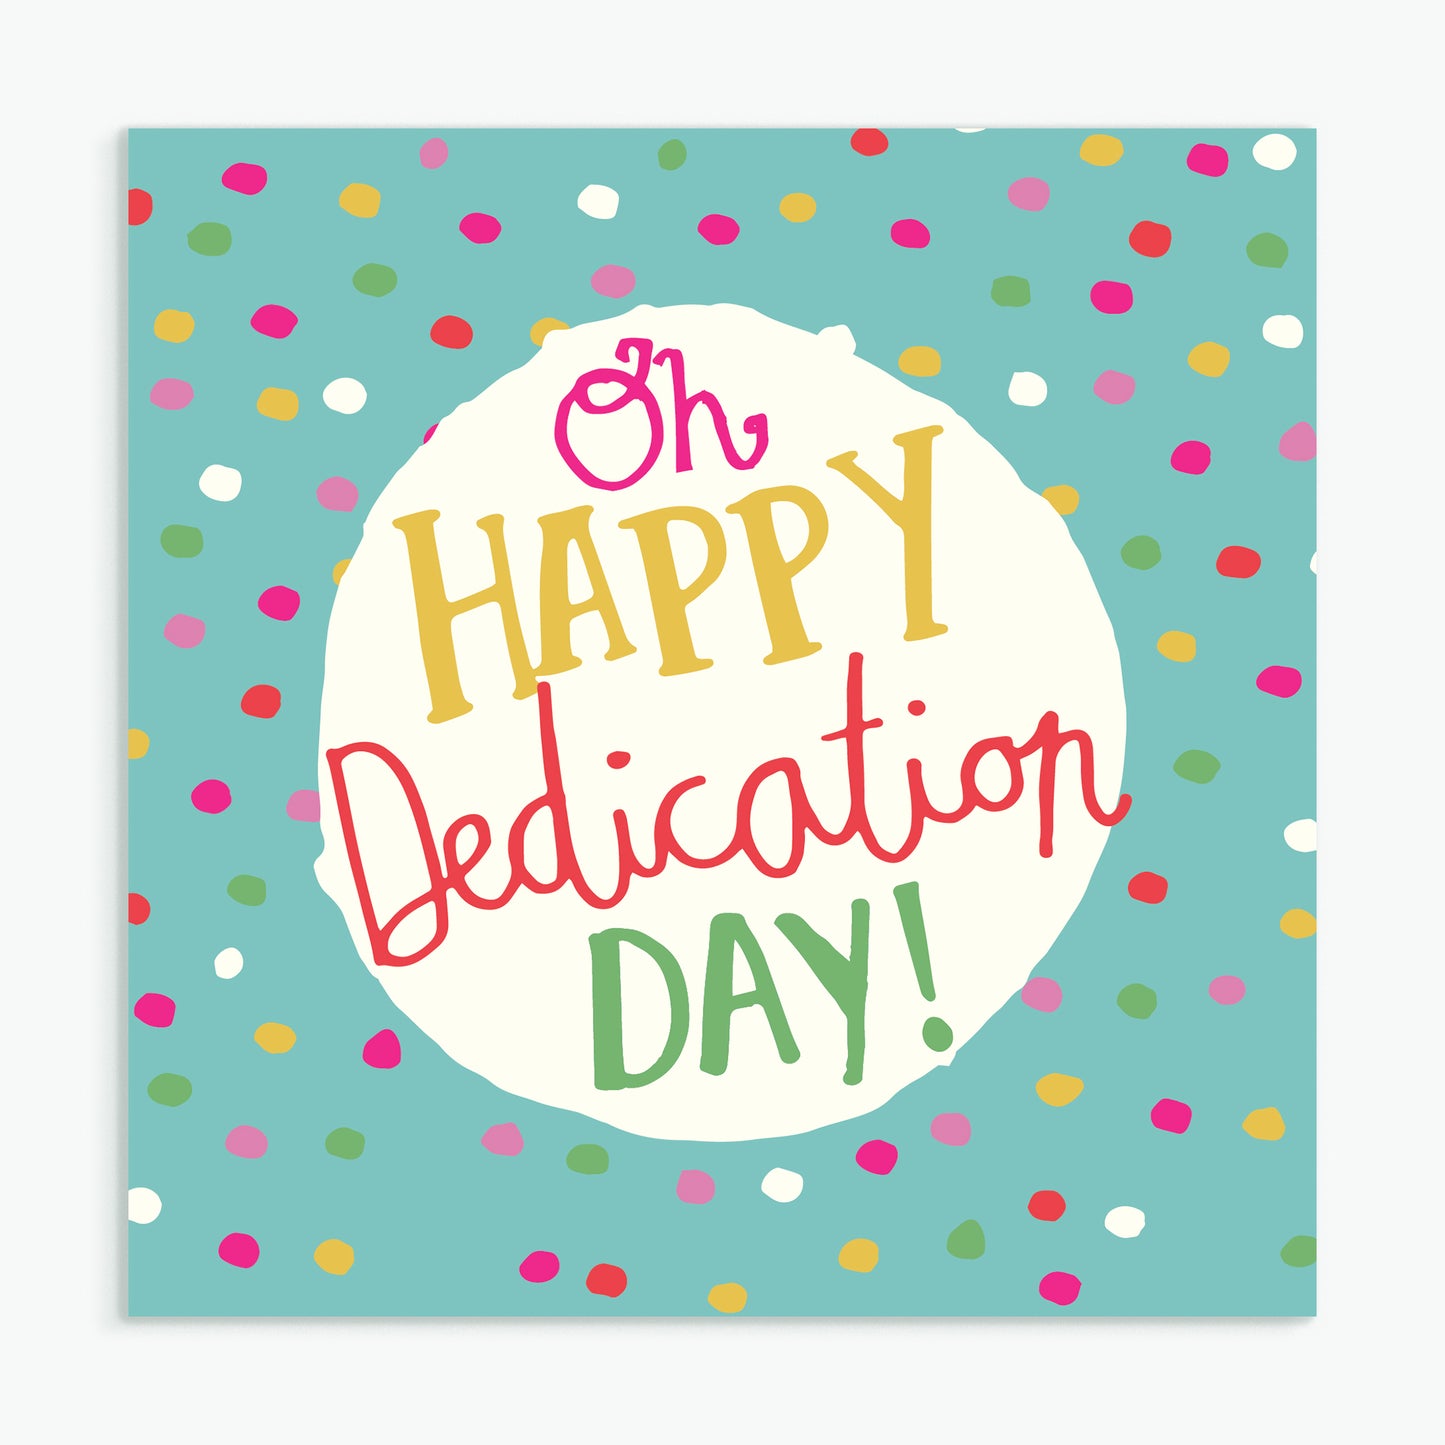 'Oh Happy Dedication Day' Greeting Card & Envelope